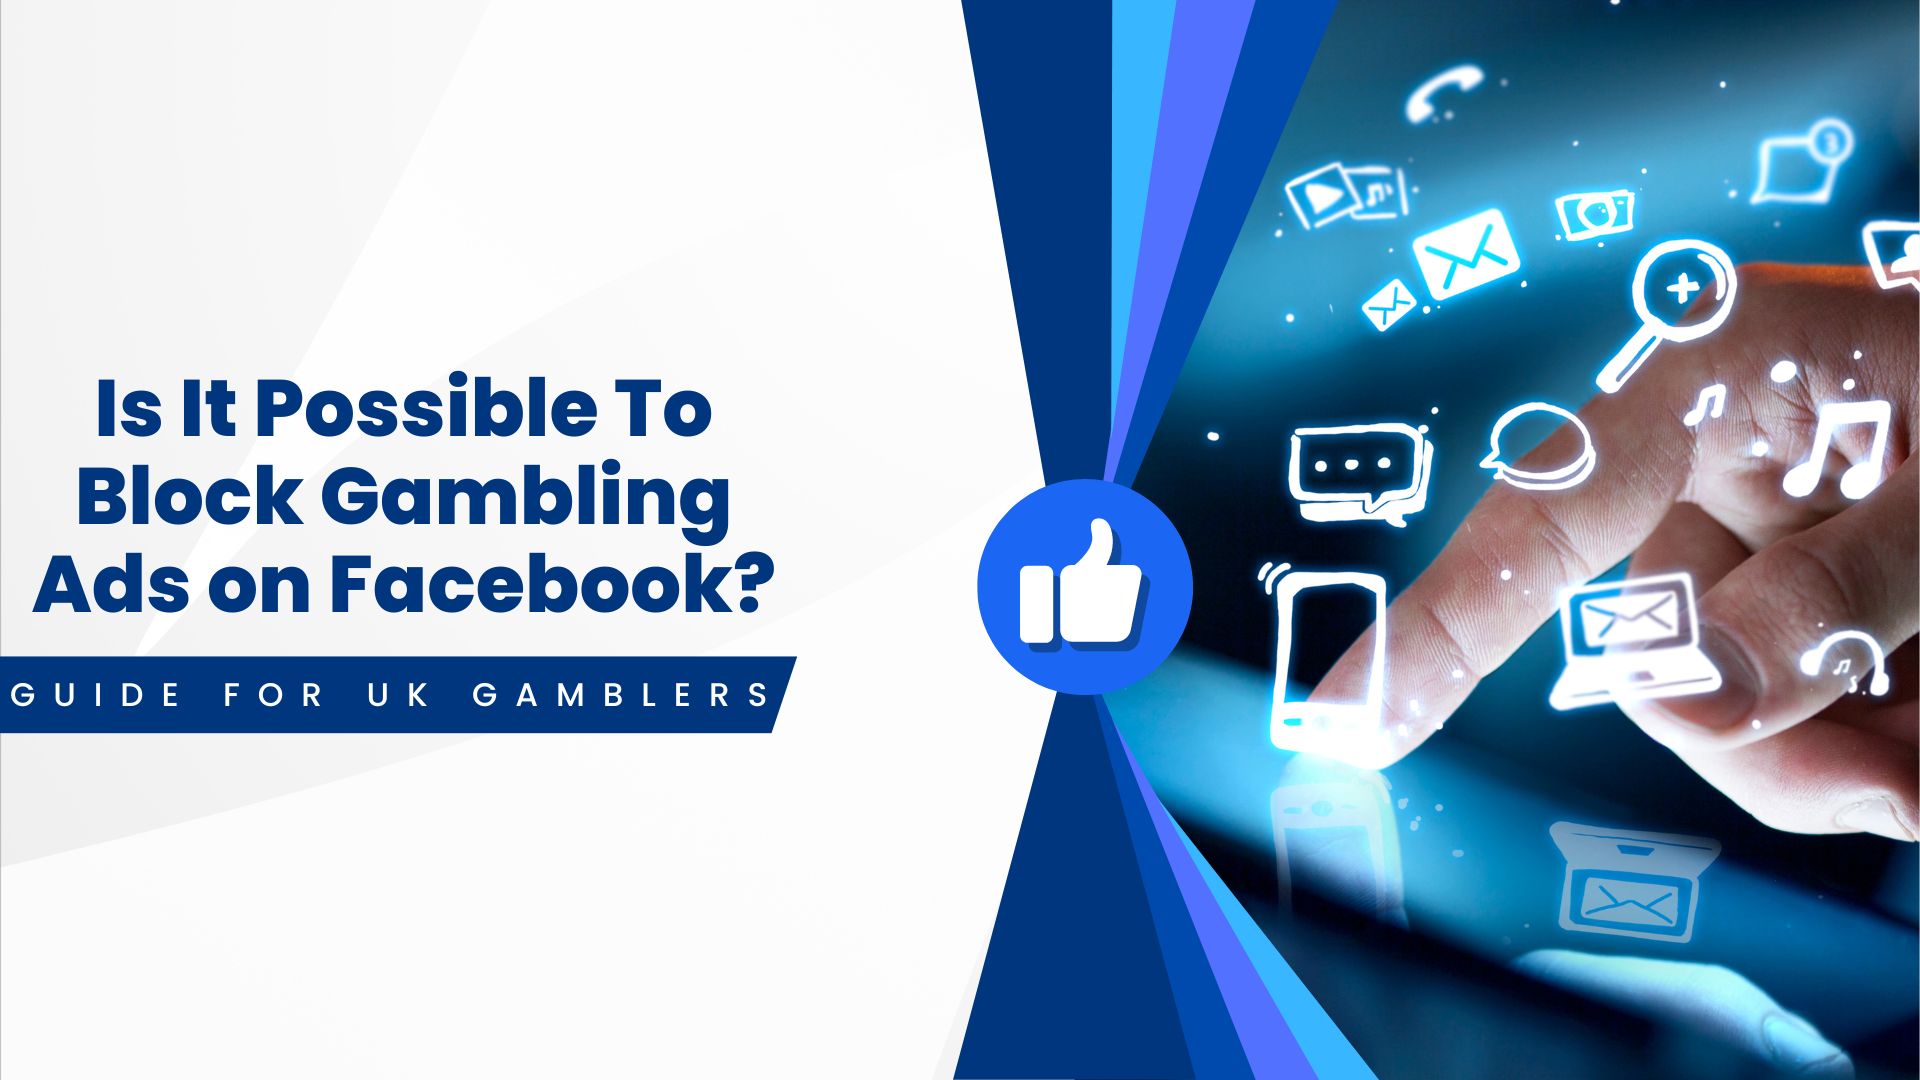 Is It Possible To Block Gambling Ads on Facebook?